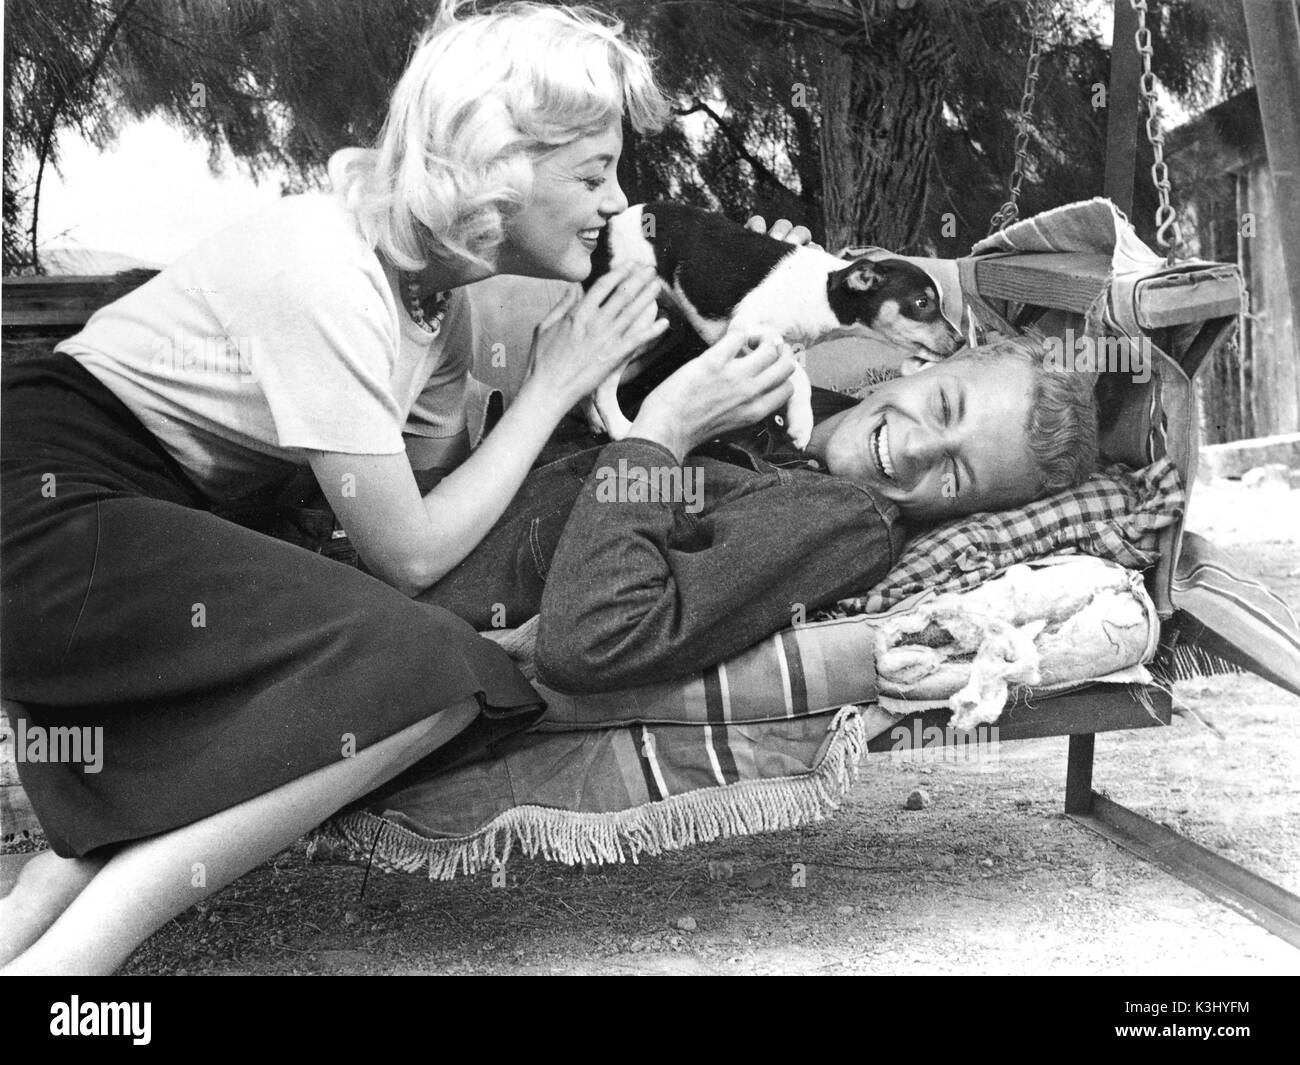 SKY FULL OF MOON JAN STERLING teases co-star CARLETON CARPENTER between scenes with the aid of a lively puppy SKY FULL OF MOON JAN STERLING teases co-star CARLETON CARPENTER between scenes with the aid of a lively puppy Stock Photo